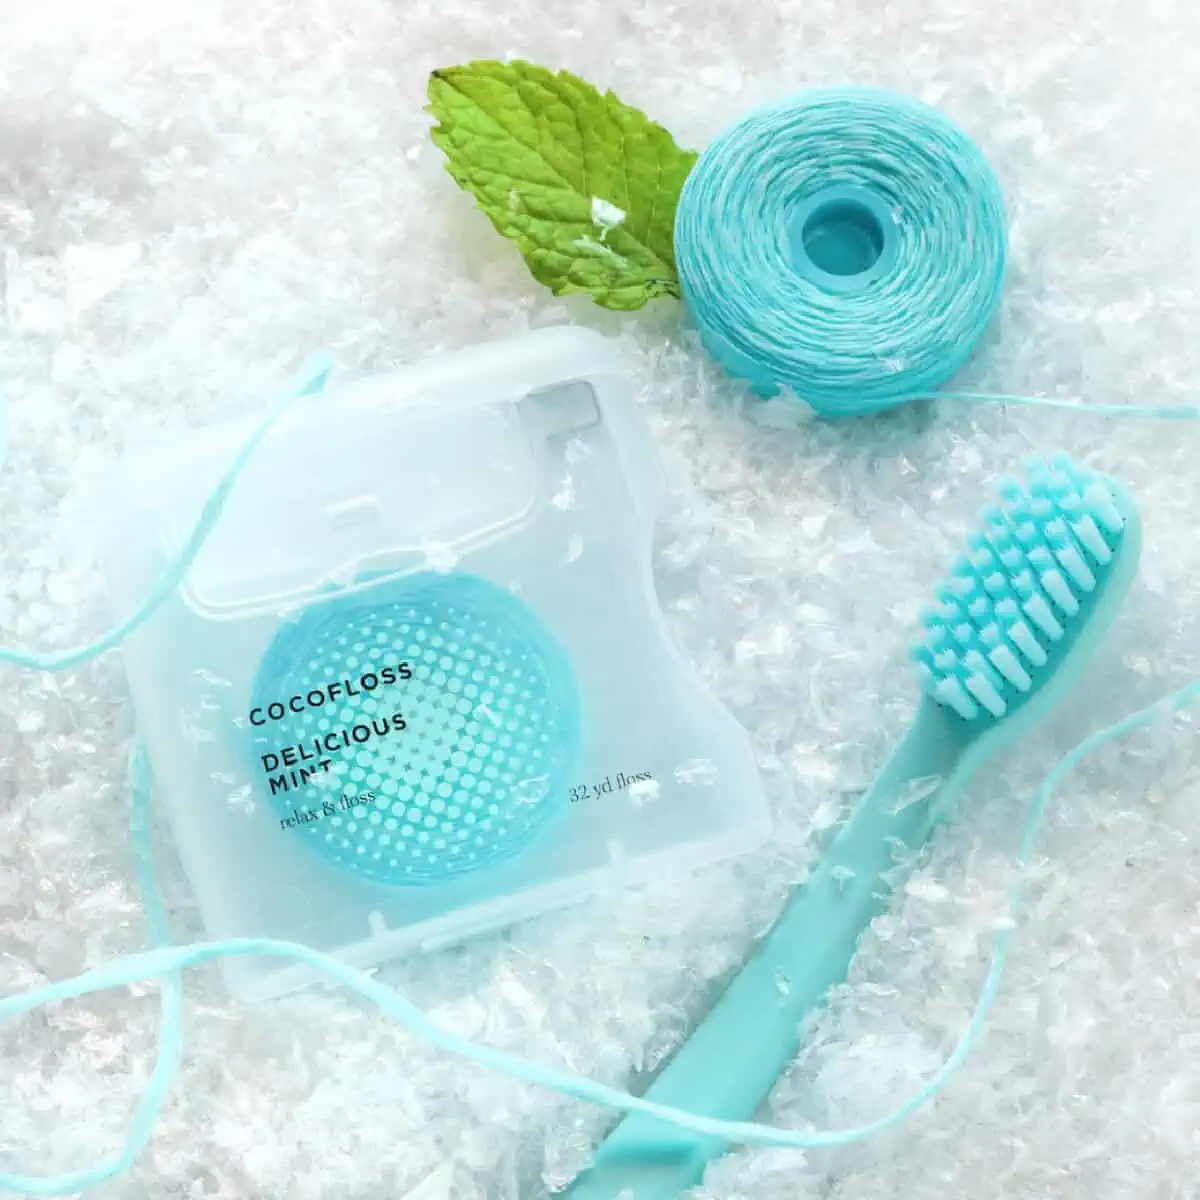 A clear container of turquoise colored vegan Coco Floss on a snowy background next to more floss, a matching toothbrush, and a peppermint leaf.